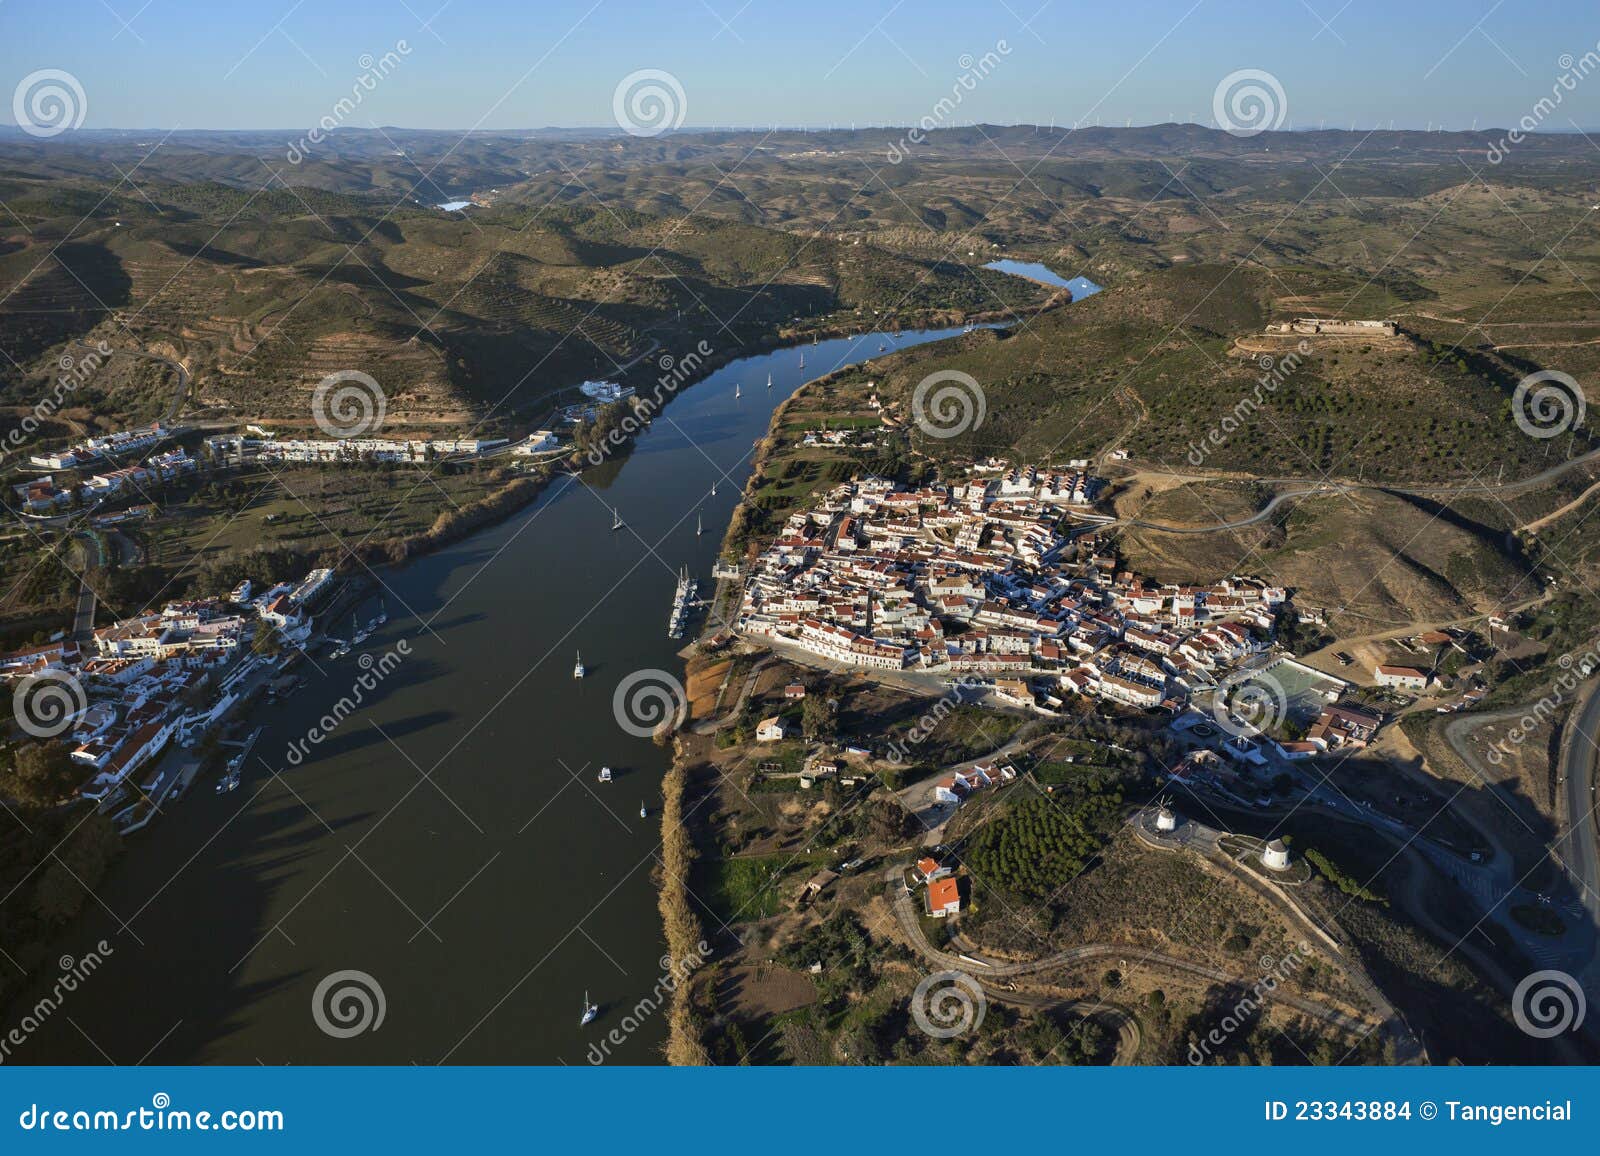 aerial view of the guadiana river